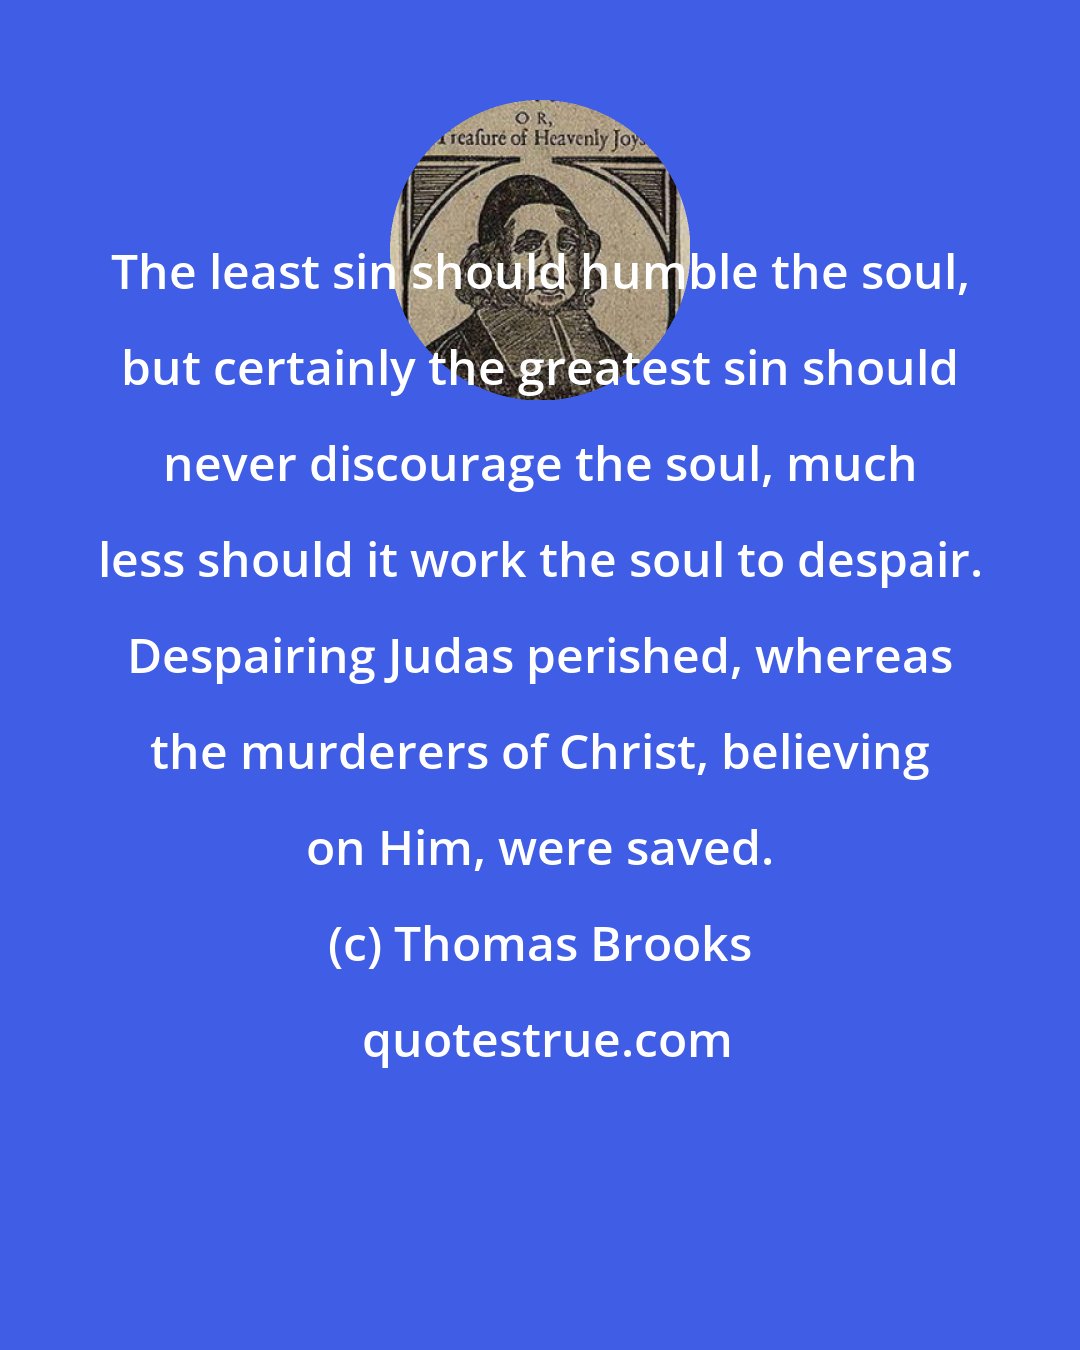 Thomas Brooks: The least sin should humble the soul, but certainly the greatest sin should never discourage the soul, much less should it work the soul to despair. Despairing Judas perished, whereas the murderers of Christ, believing on Him, were saved.